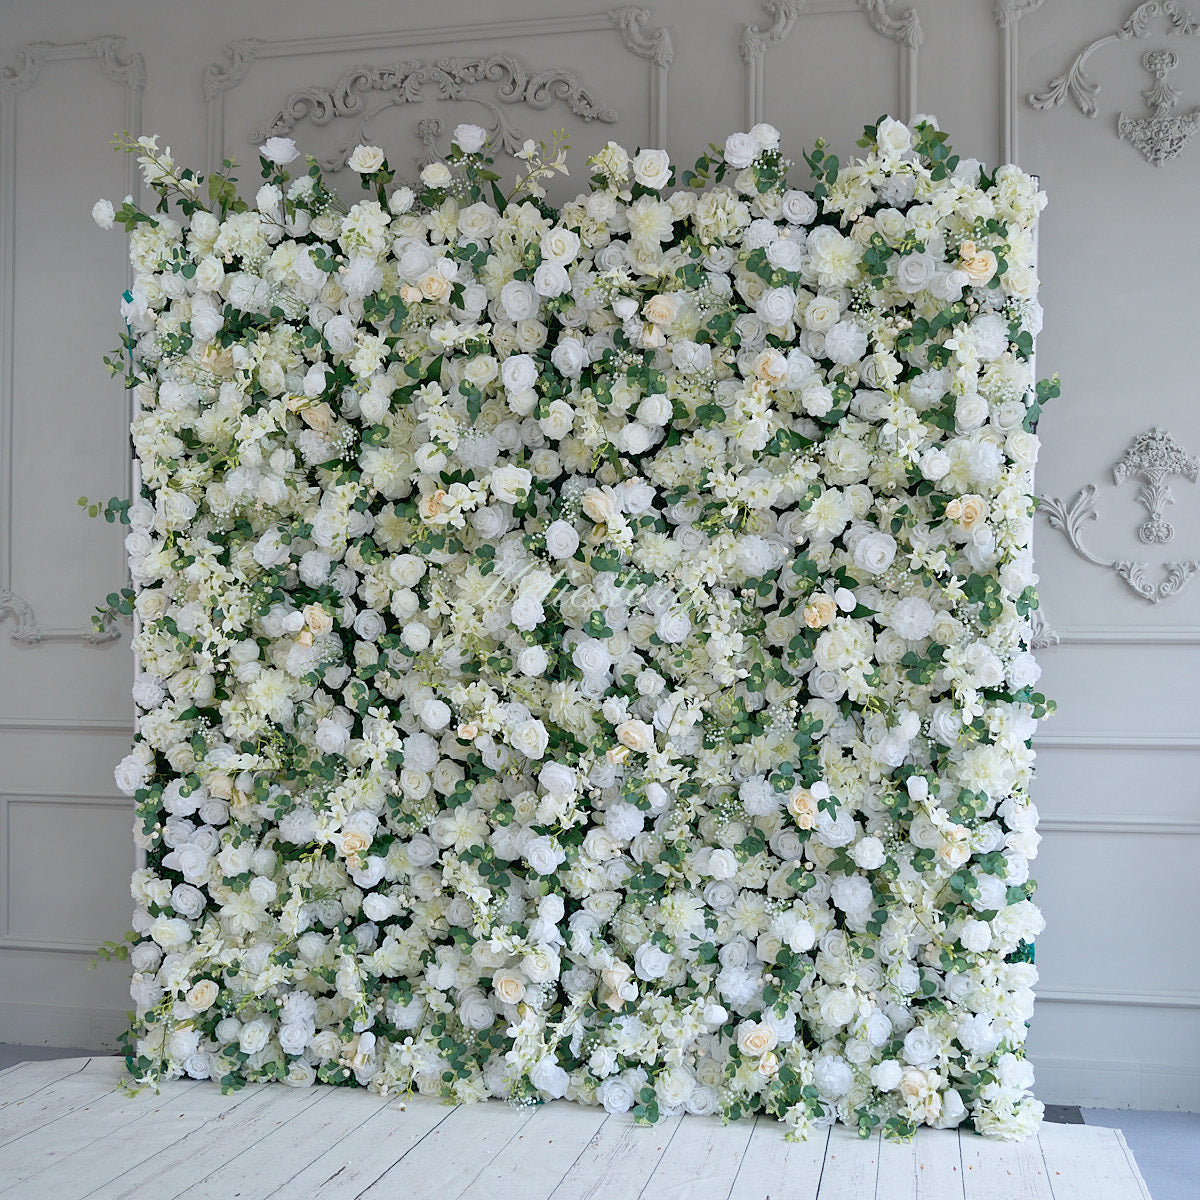 Flower Wall White & Champagne Fabric Rolling Up Curtain Floral Backdrop Wedding Party Proposal Decor